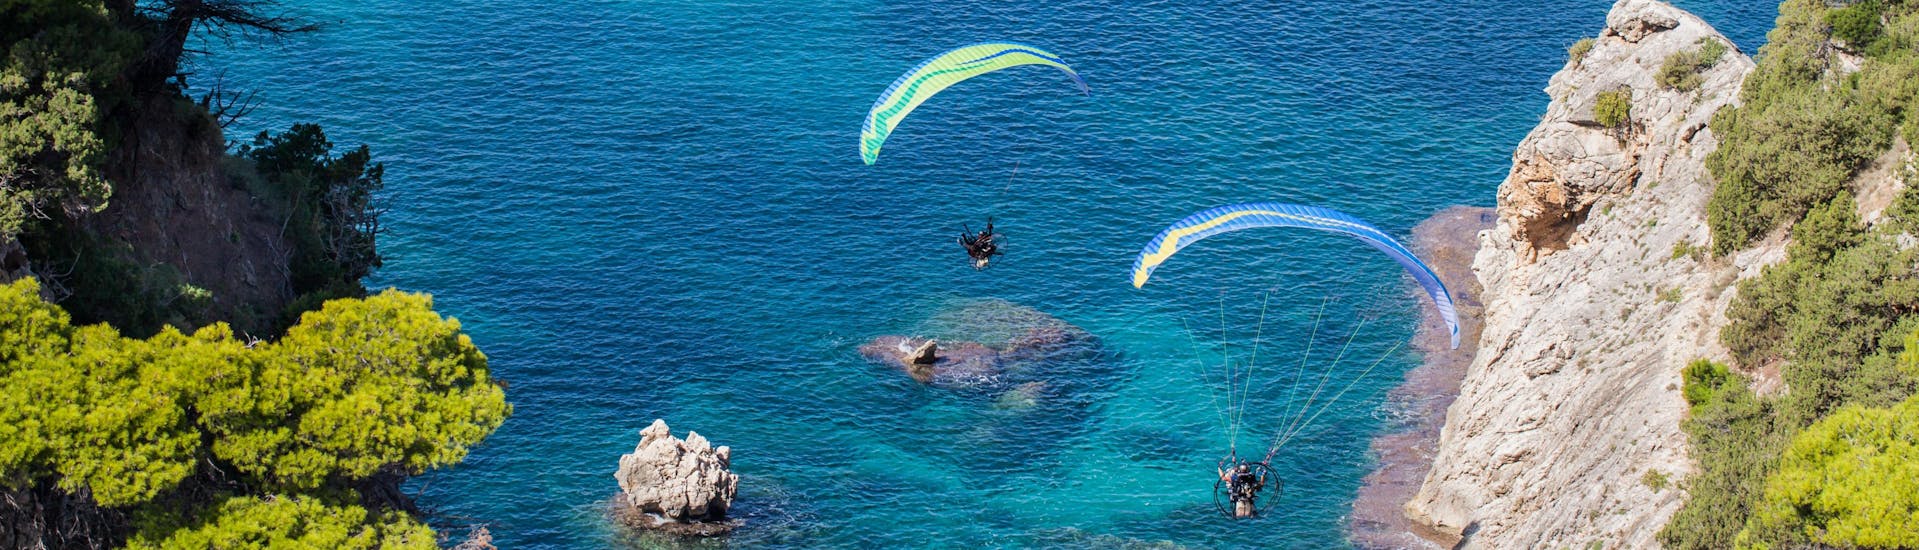 A tandem master and his passenger are sailing through cloudy skies while paragliding in Crete.